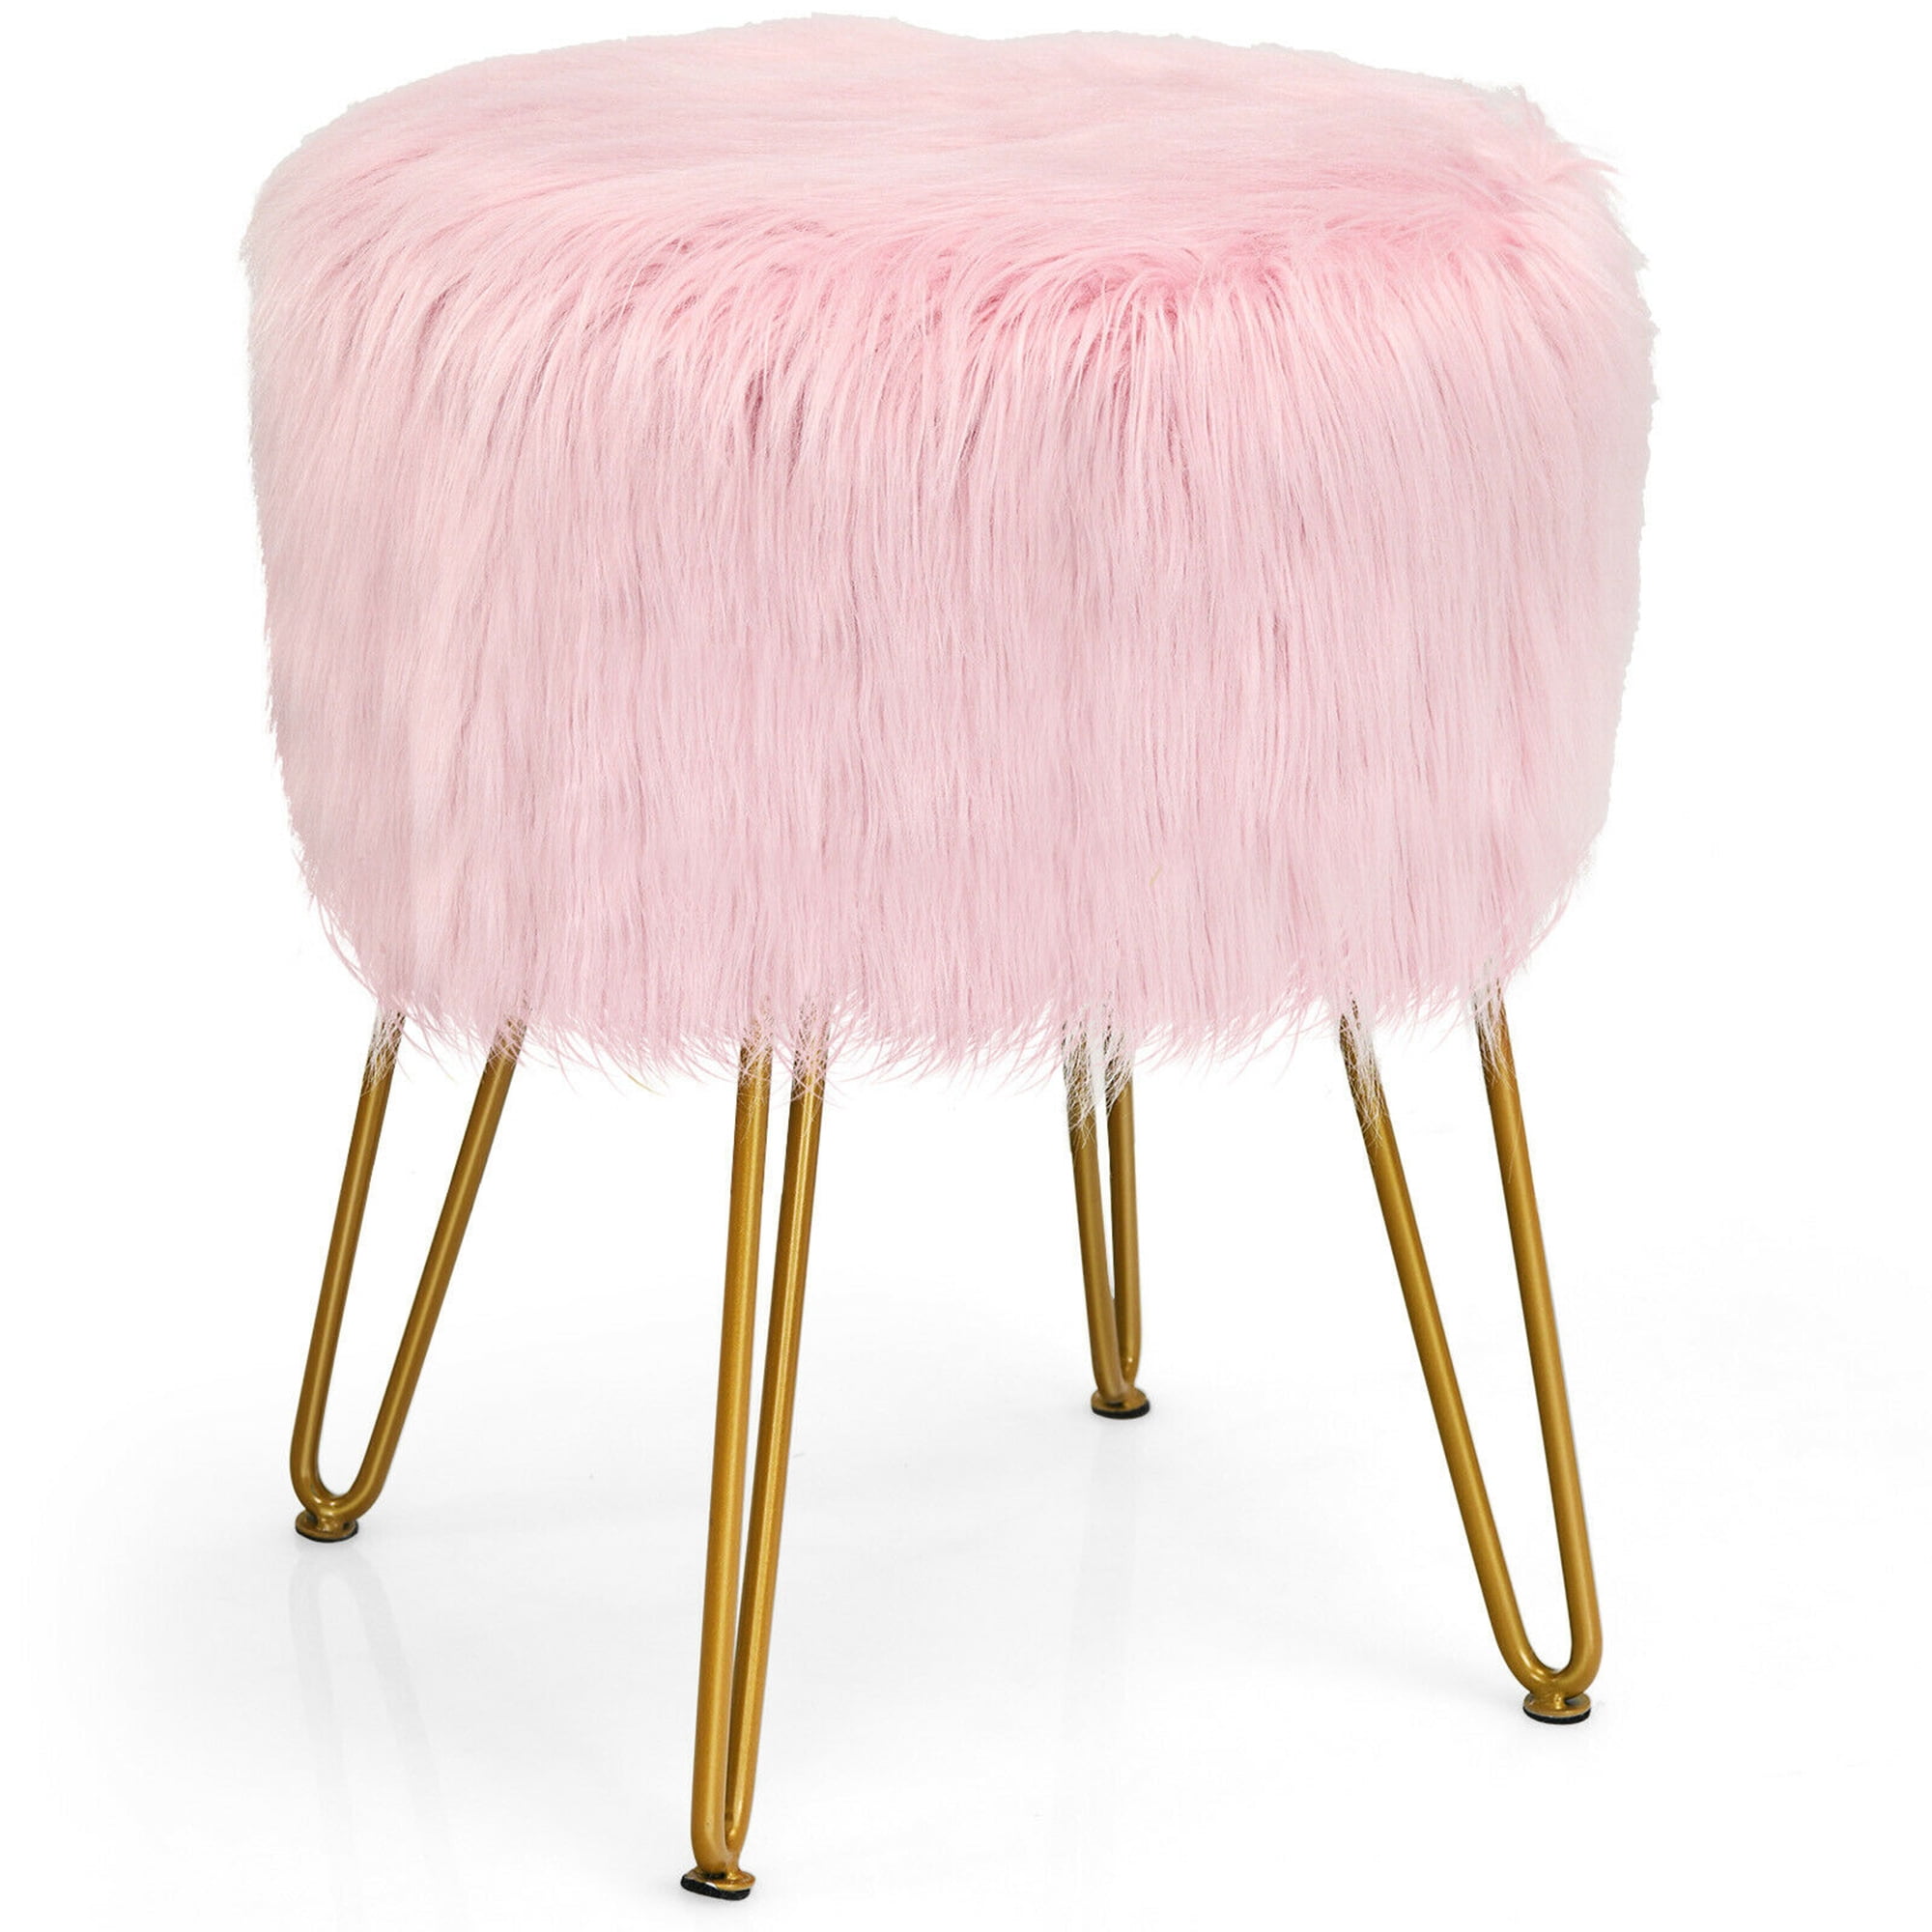 Modern Pink Fluffy Sitting Stool or Foot Stool Ottoman Pouffe with Padded Seat 